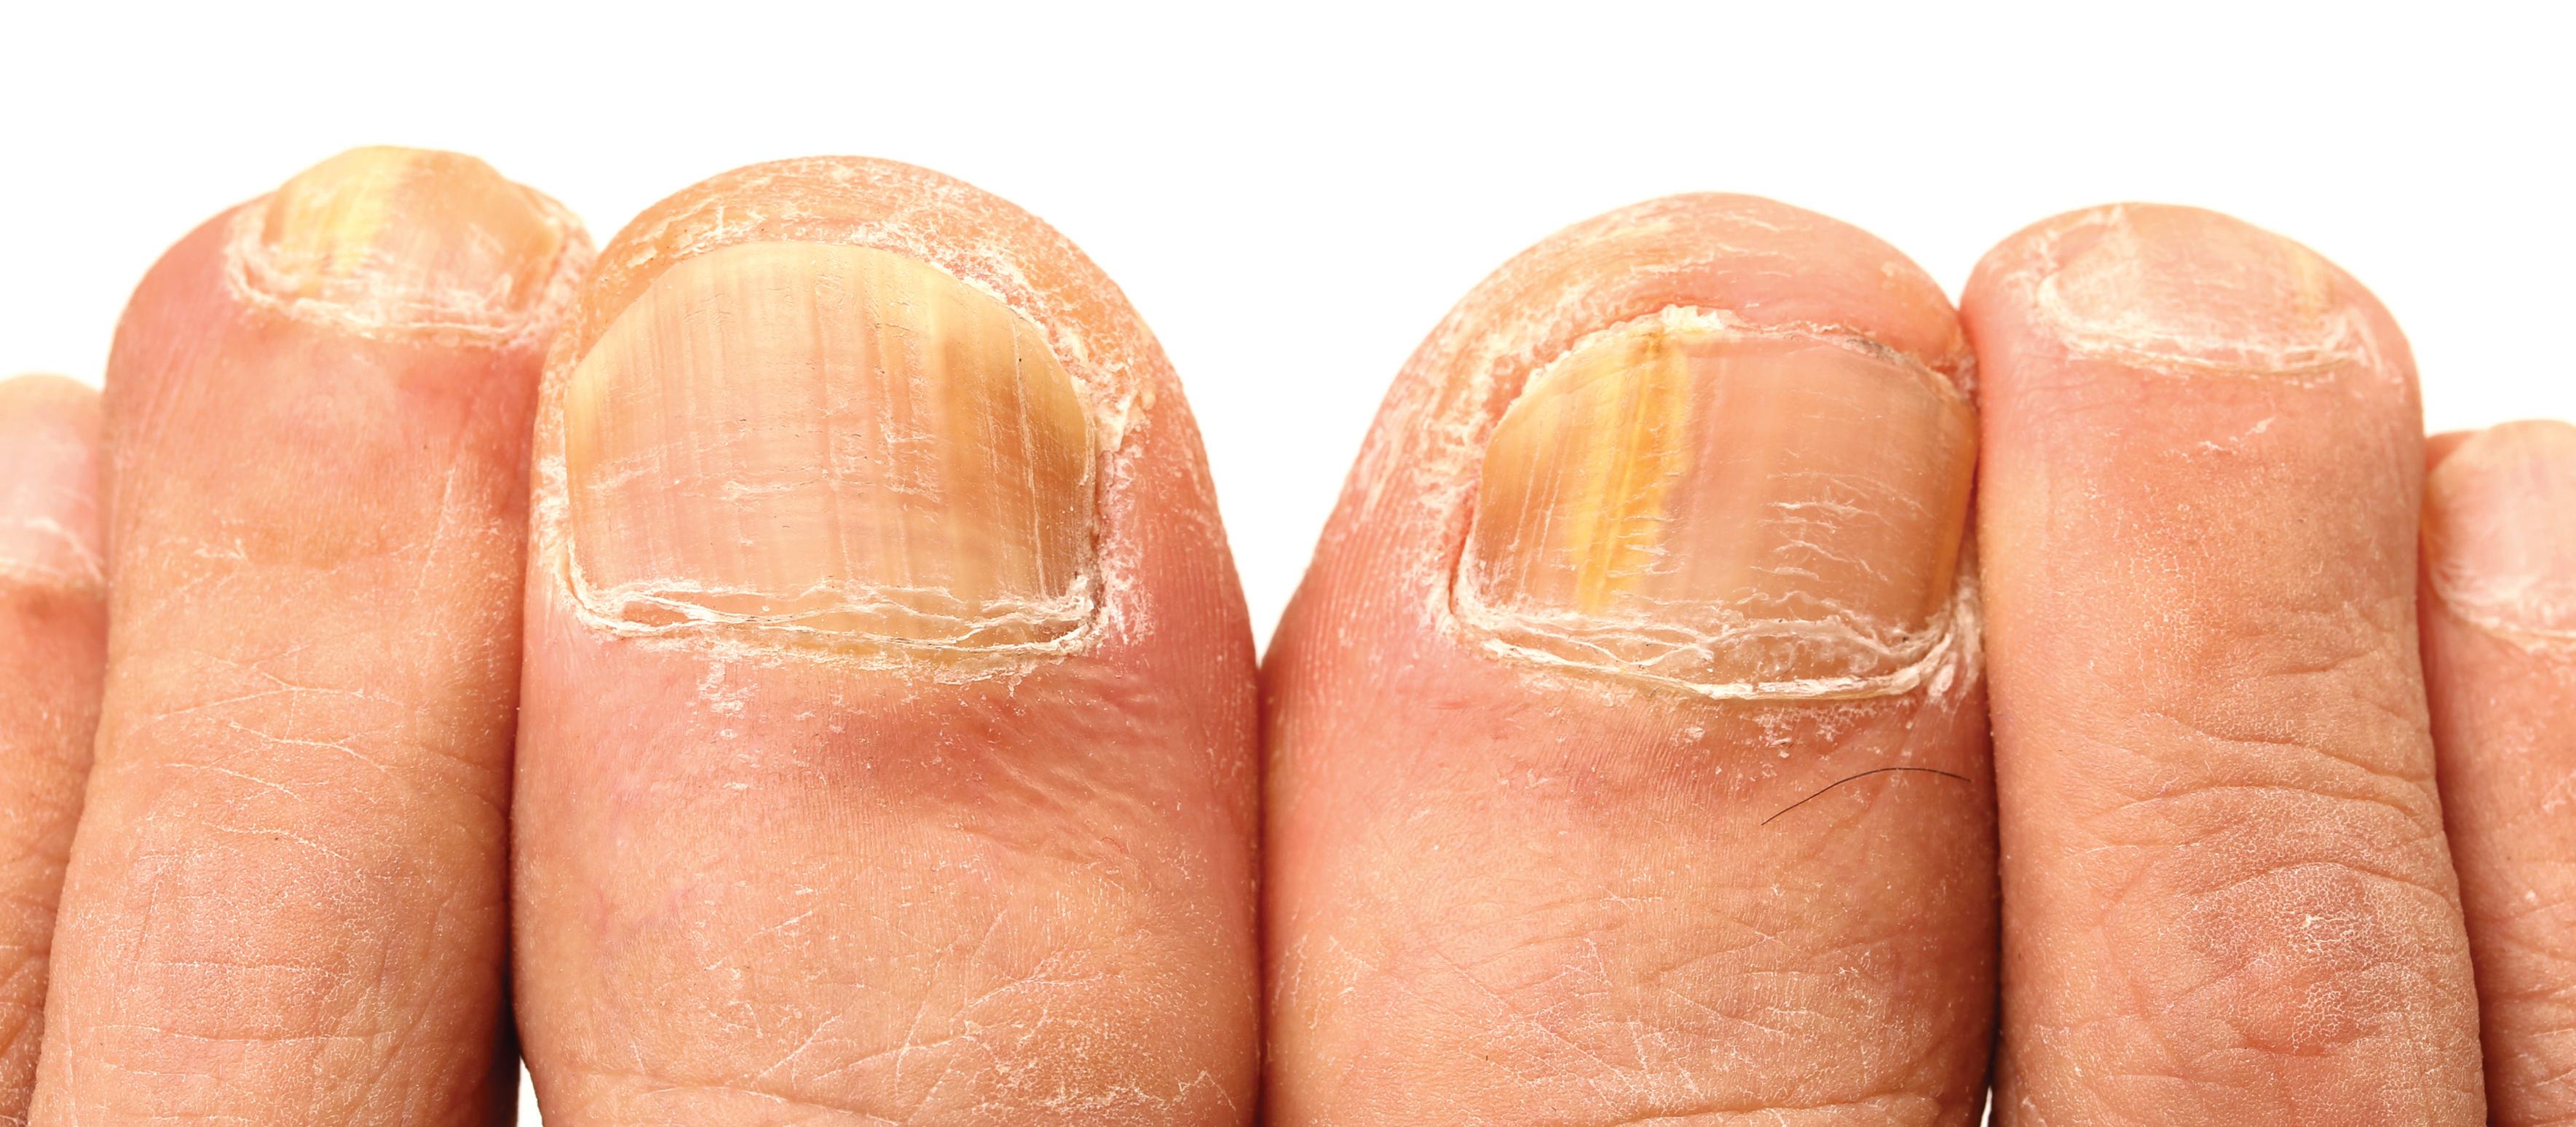 Fungal infection on nails